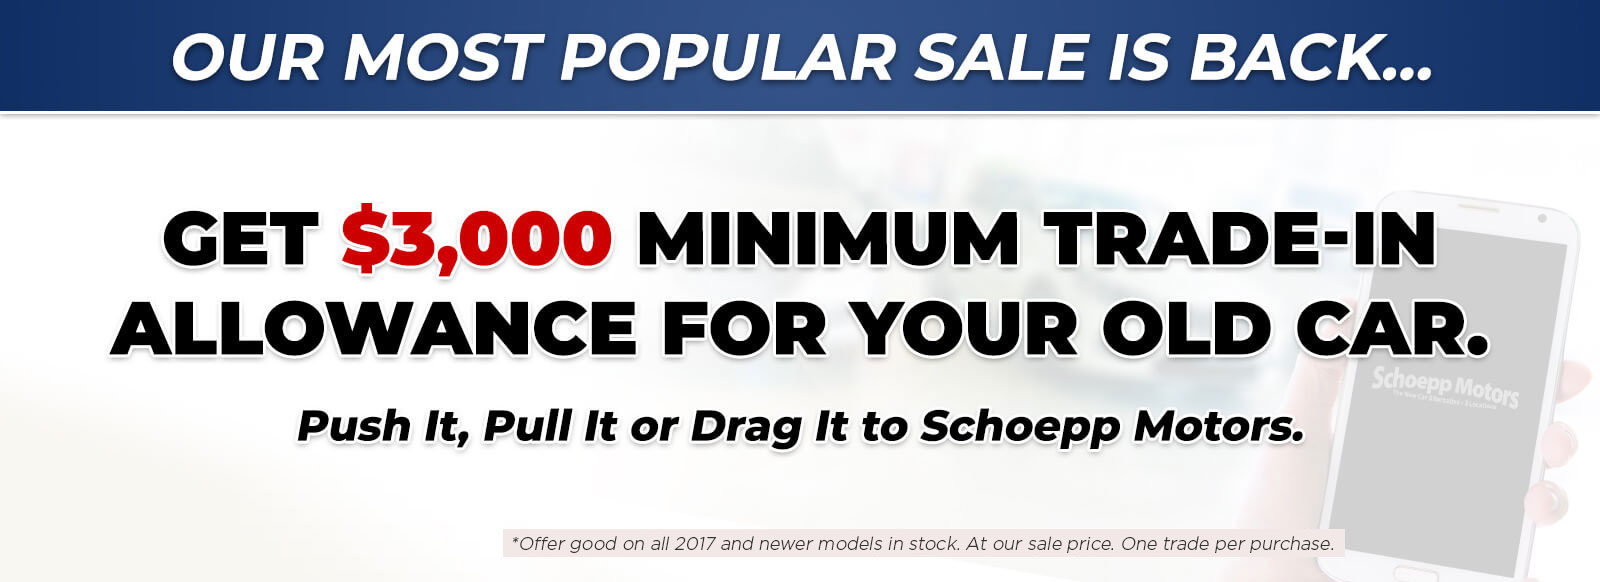 Our Most Popular Sale is back - $3000 Minimum Trade-In Allowance and get a $500 Gift Card with every purchase